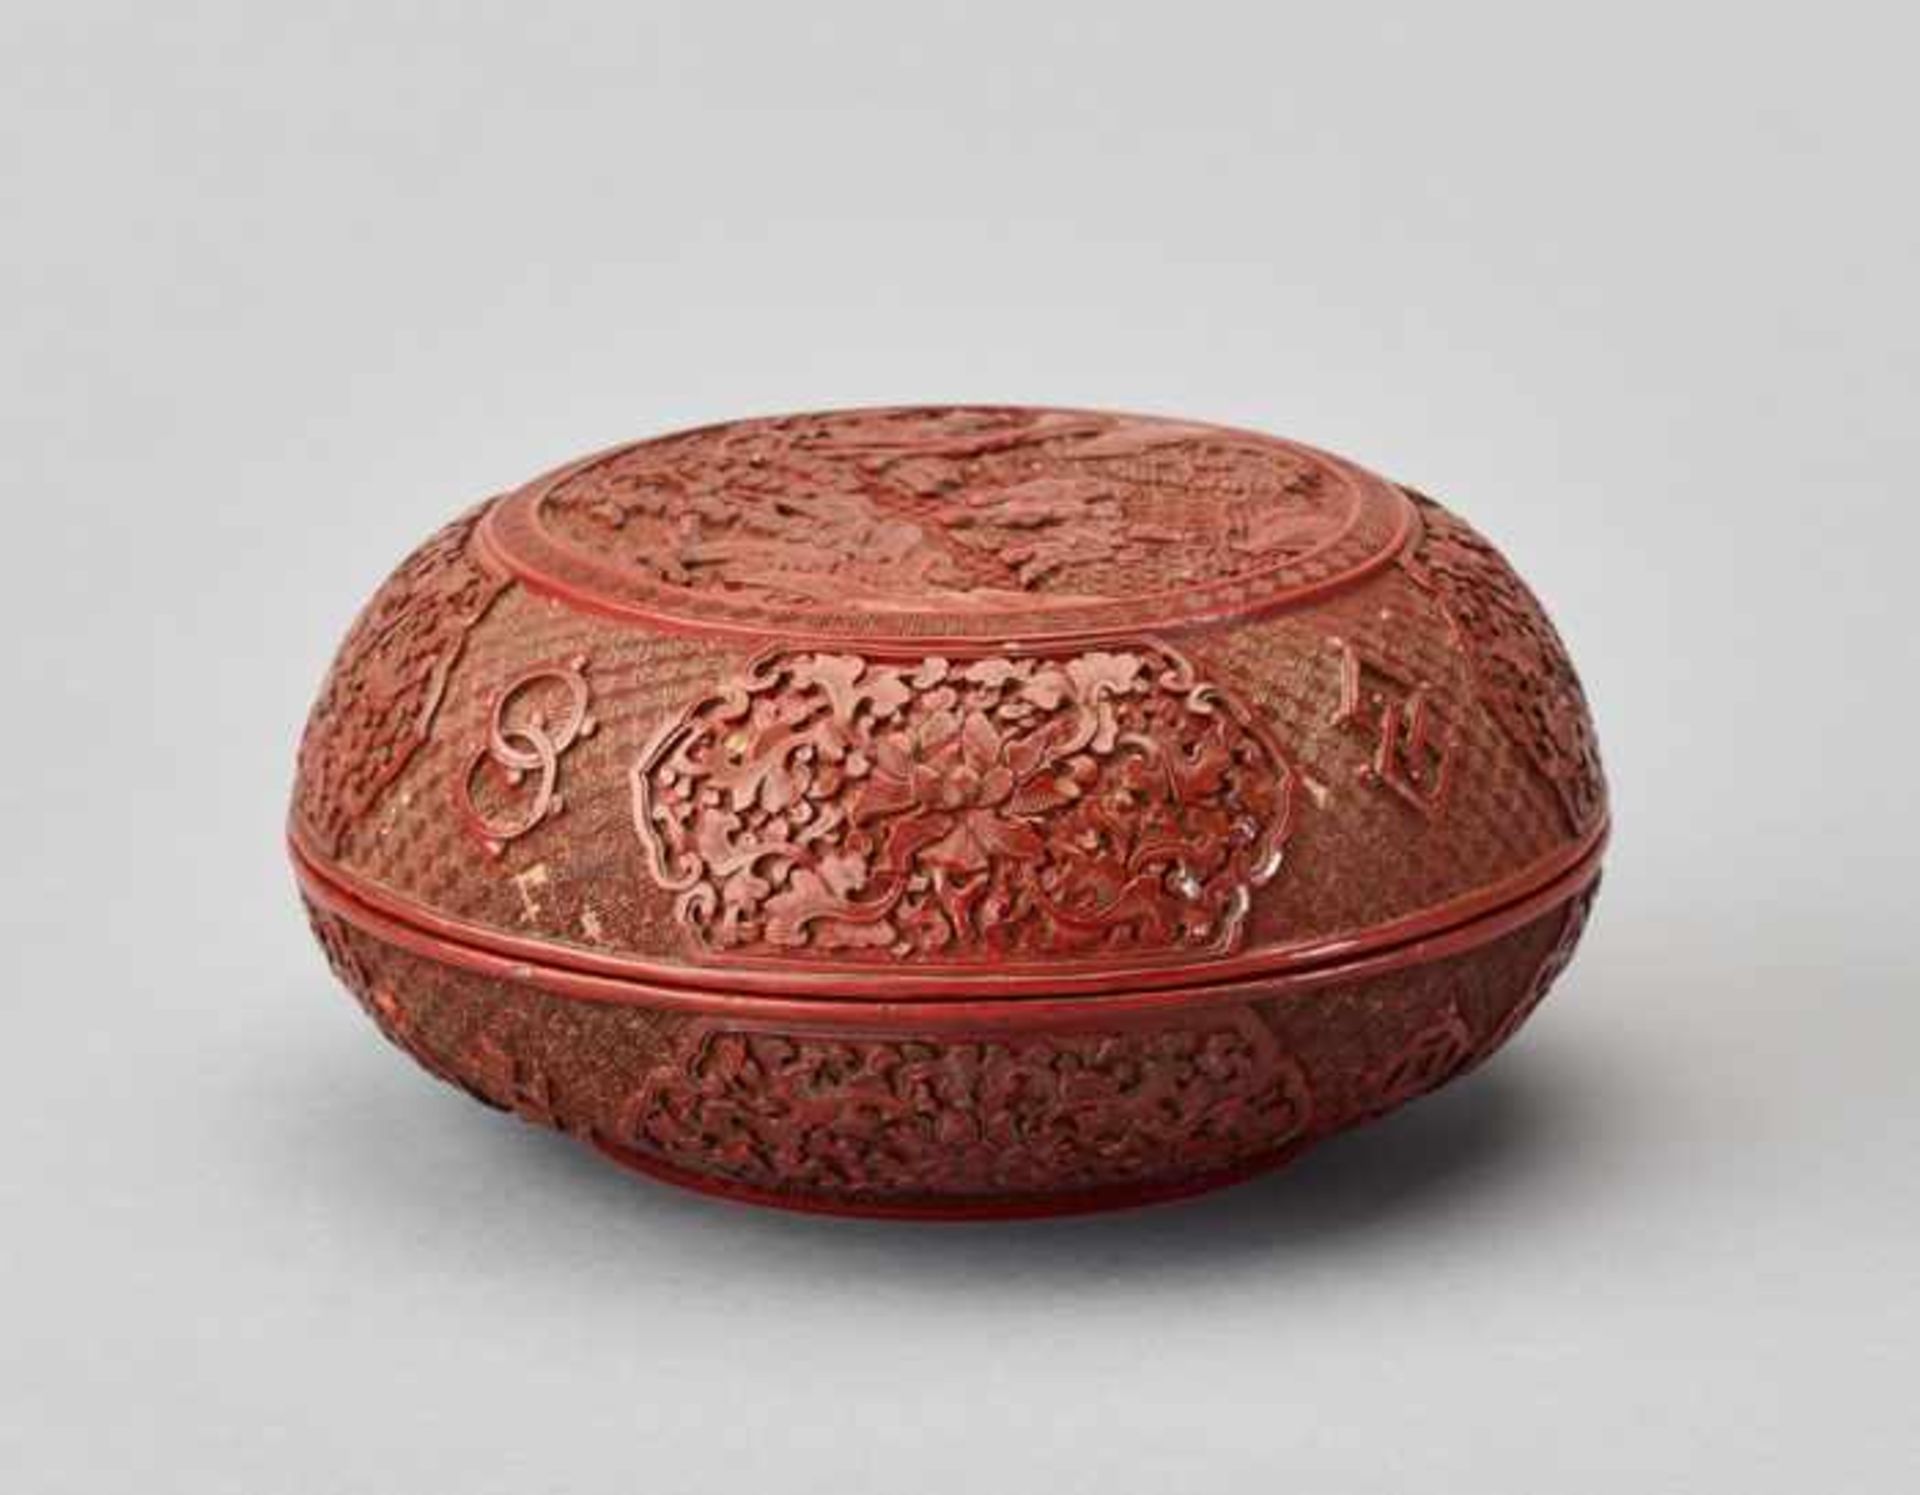 A ‘SCHOLARS AND PUPILS’ CINNABAR LACQUER BOX, 17th-18th CENTURY Massive and heavy cast metal box - Image 7 of 7